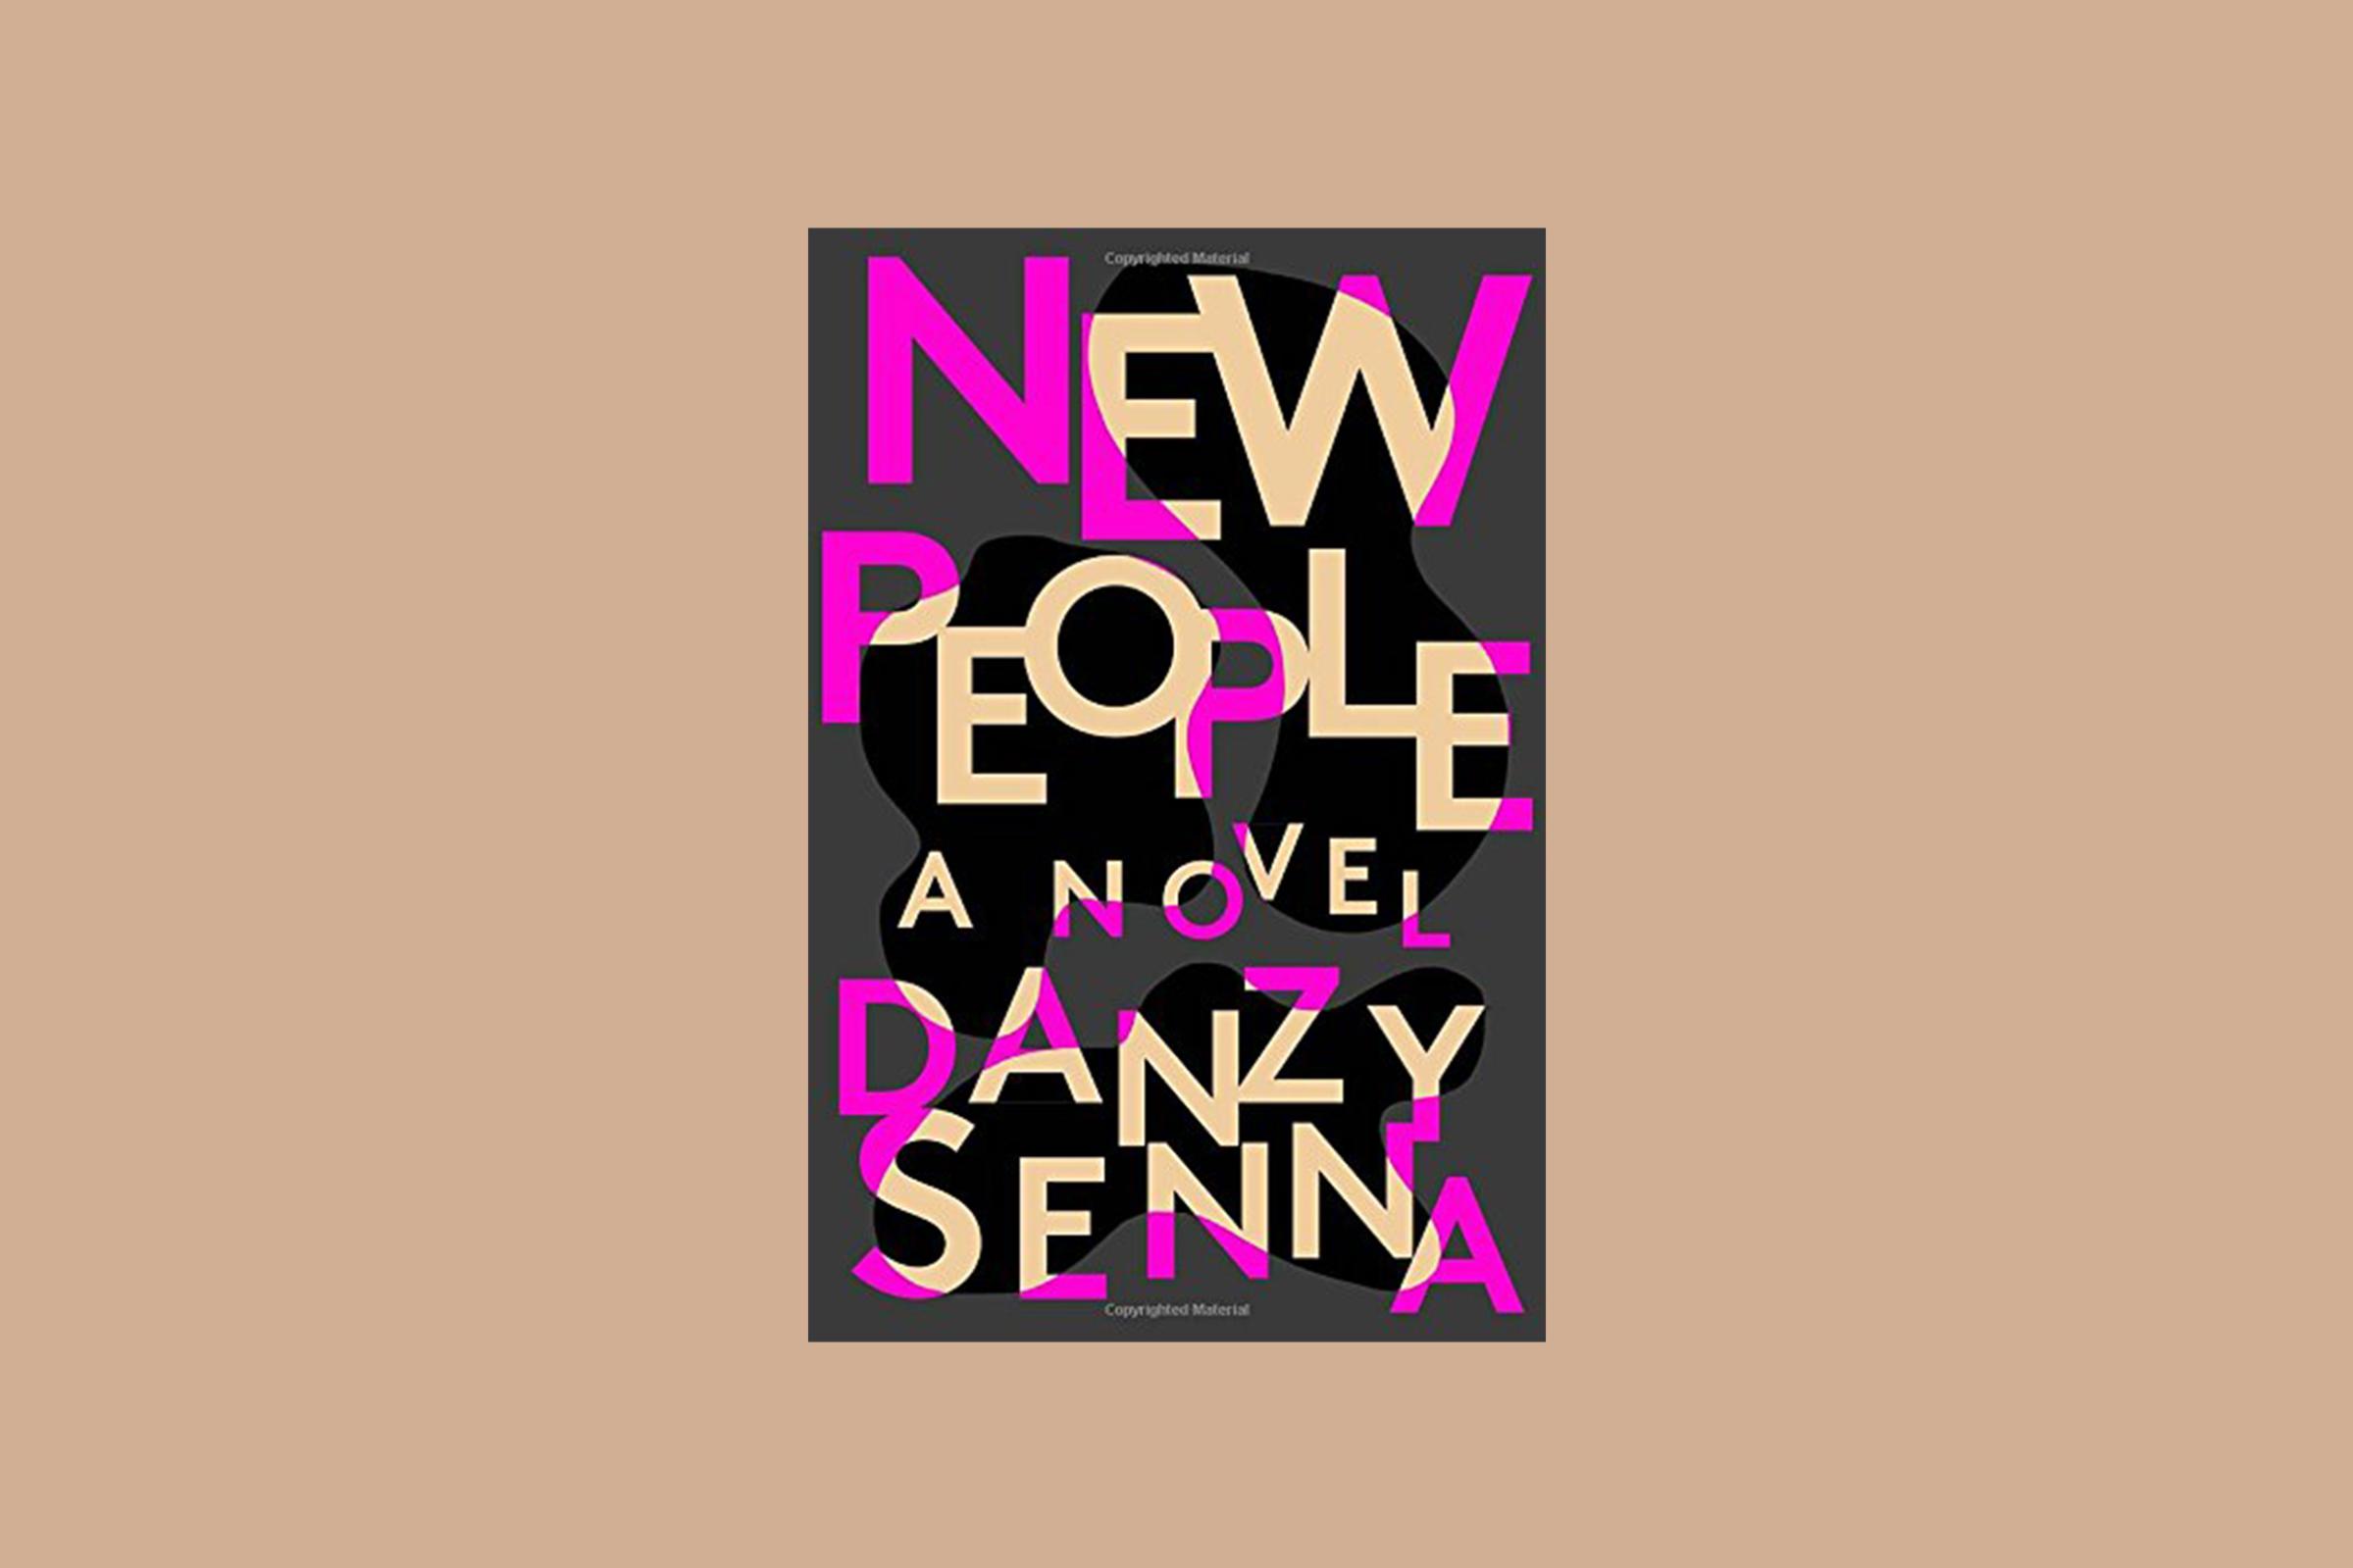 New People is one of the top 10 novels of 2017